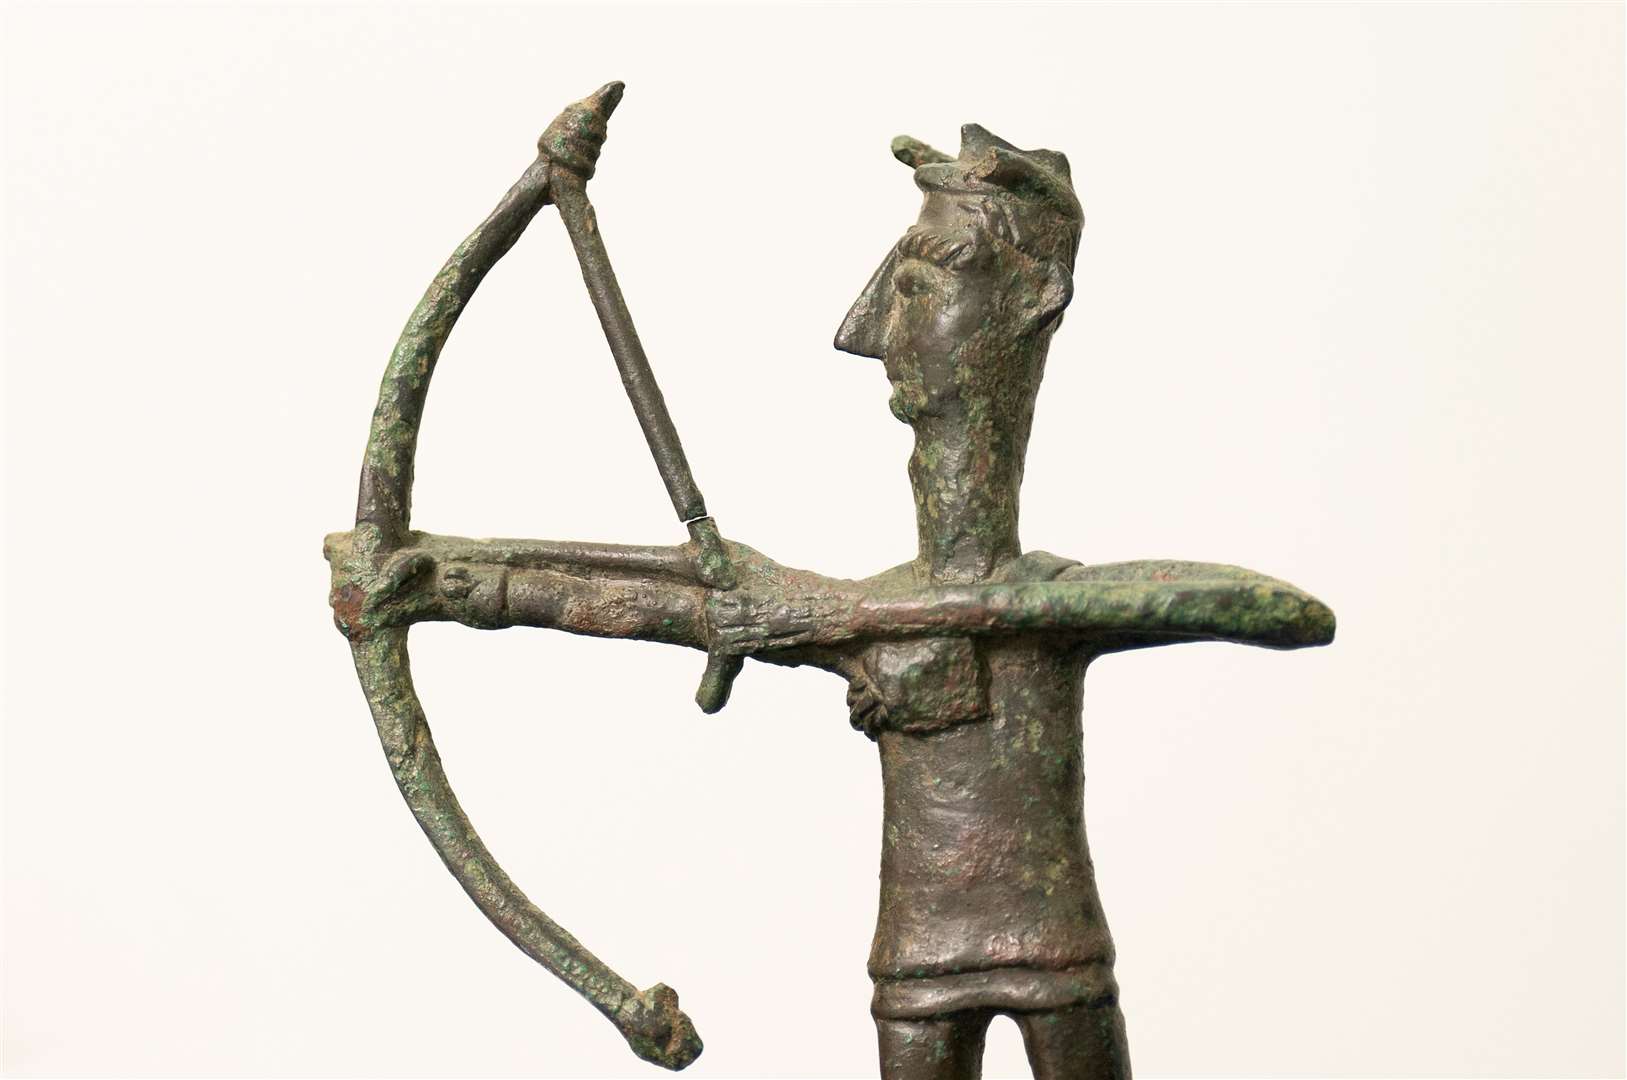 The archer figure dates from 1000 to 700 BCE (Joe Giddens/PA)